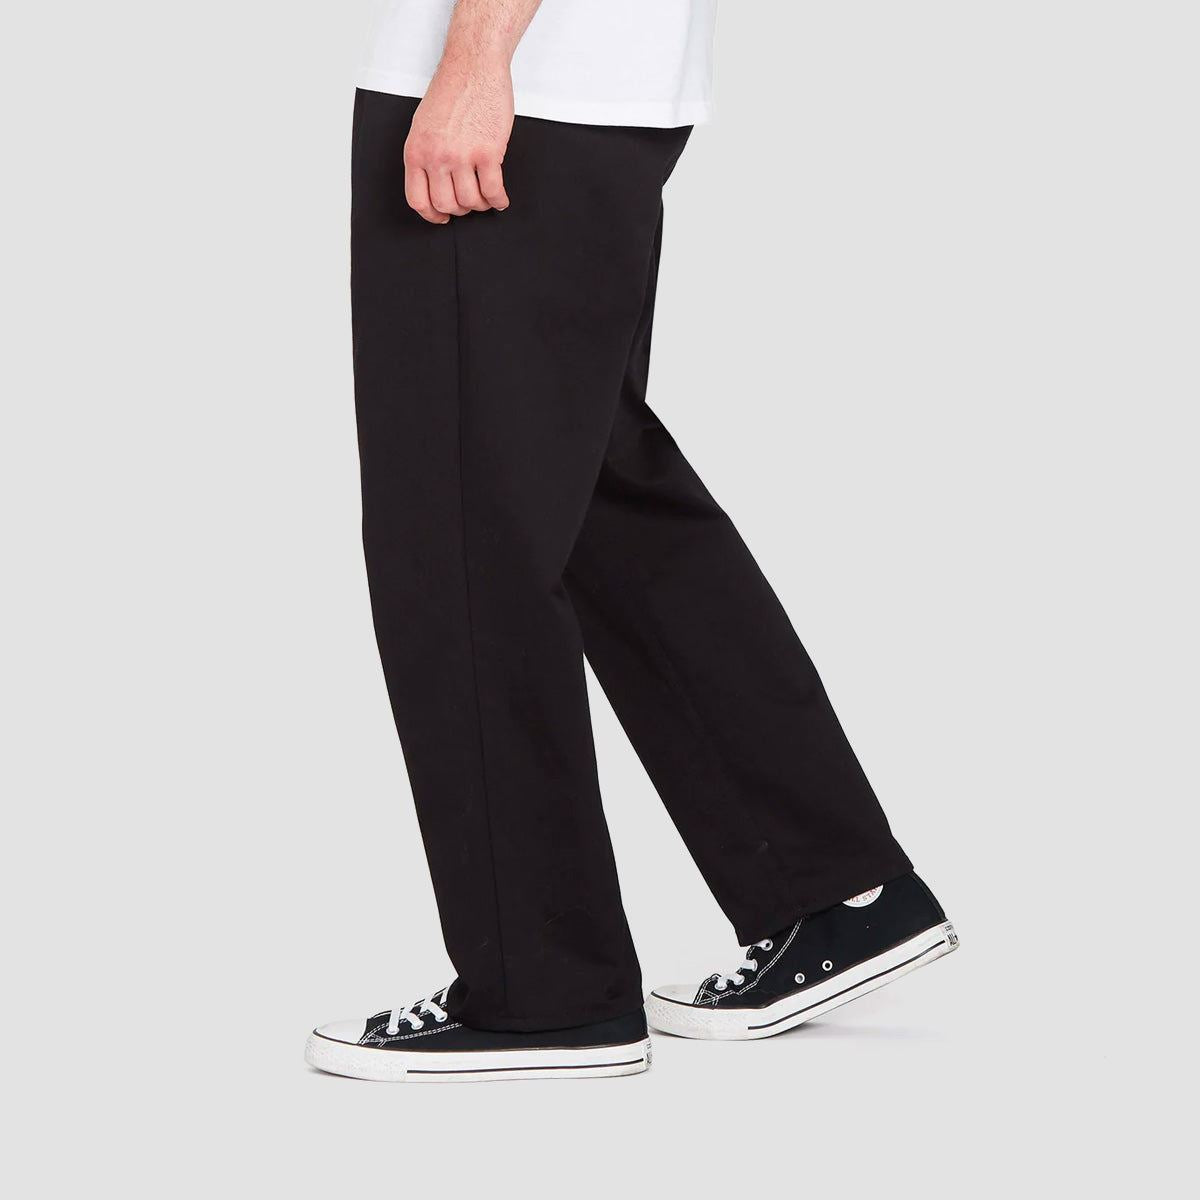 Volcom Pleated Loose Tapered Chino Pants Black